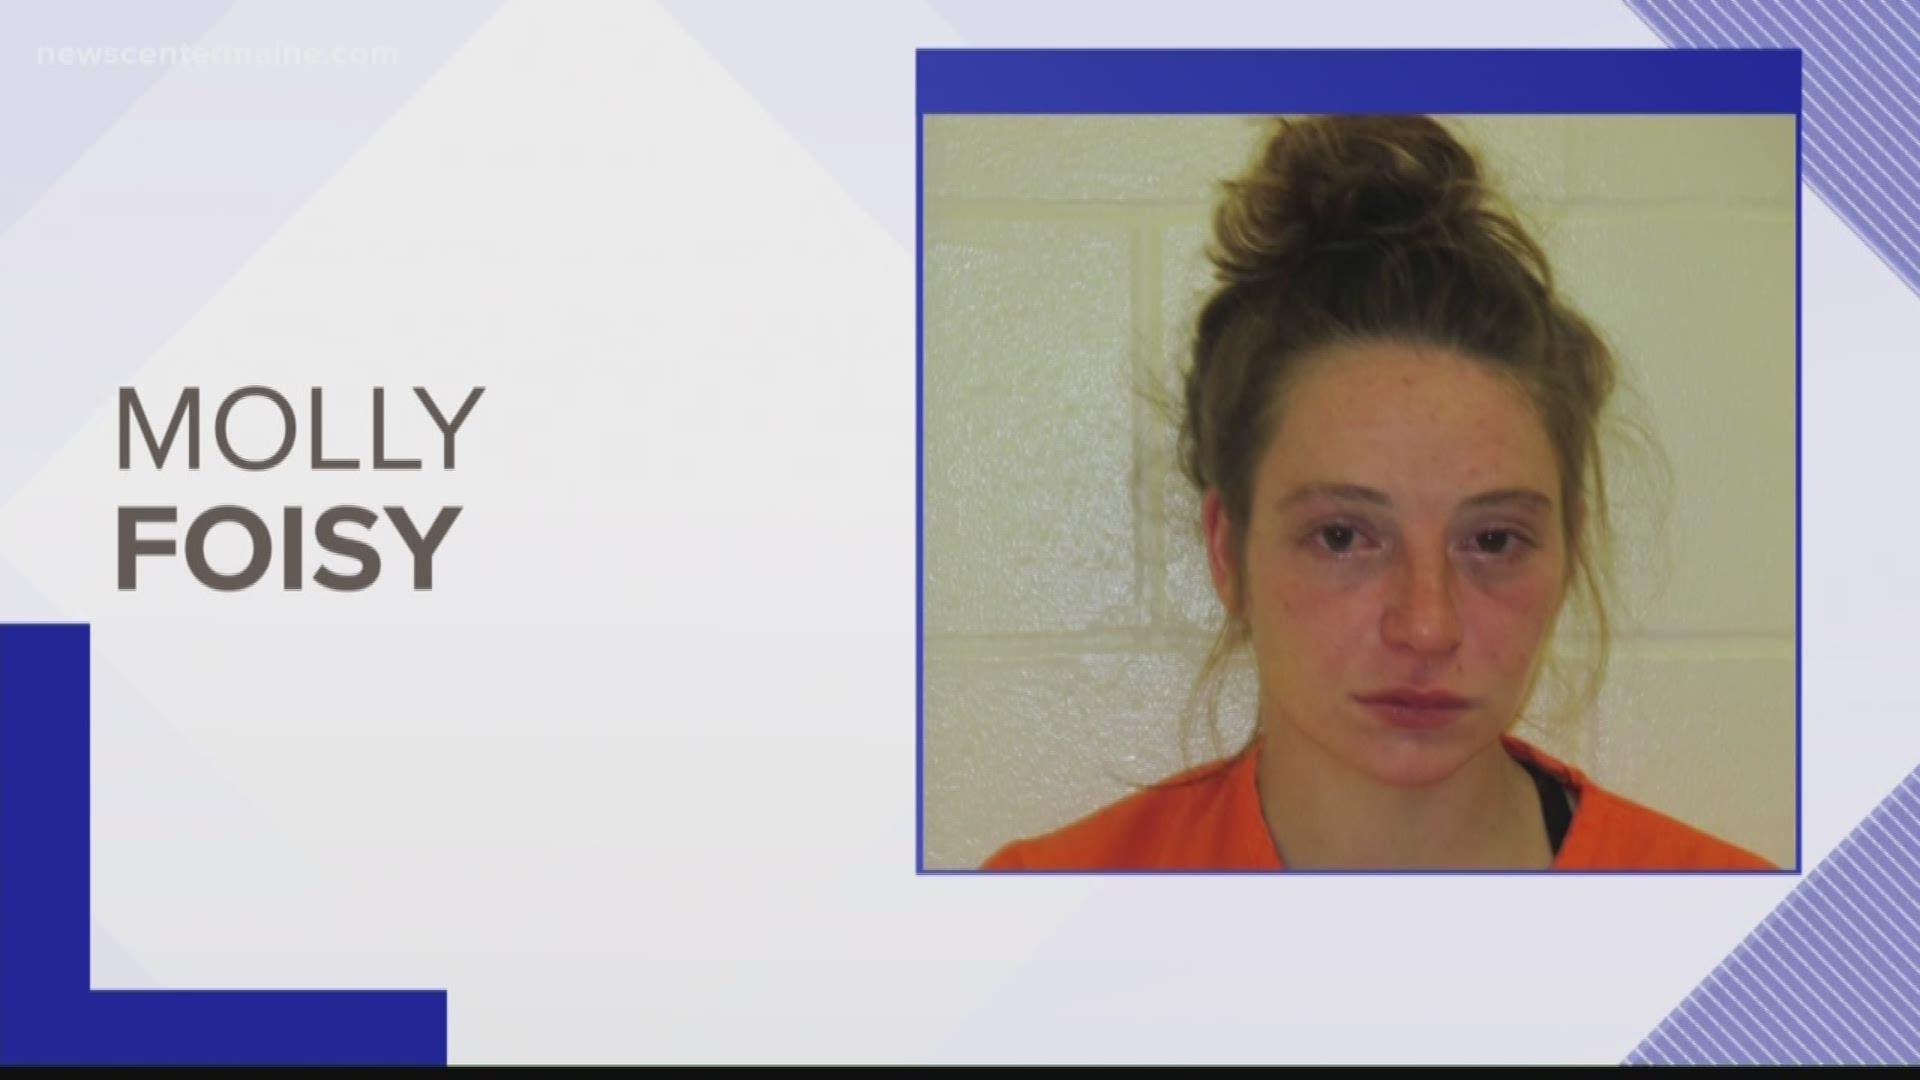 22-year-old Molly Foisy of Springvale was cited when she hit the trooper's fully marked cruiser in the breakdown lane on Route 202 in Lebanon.